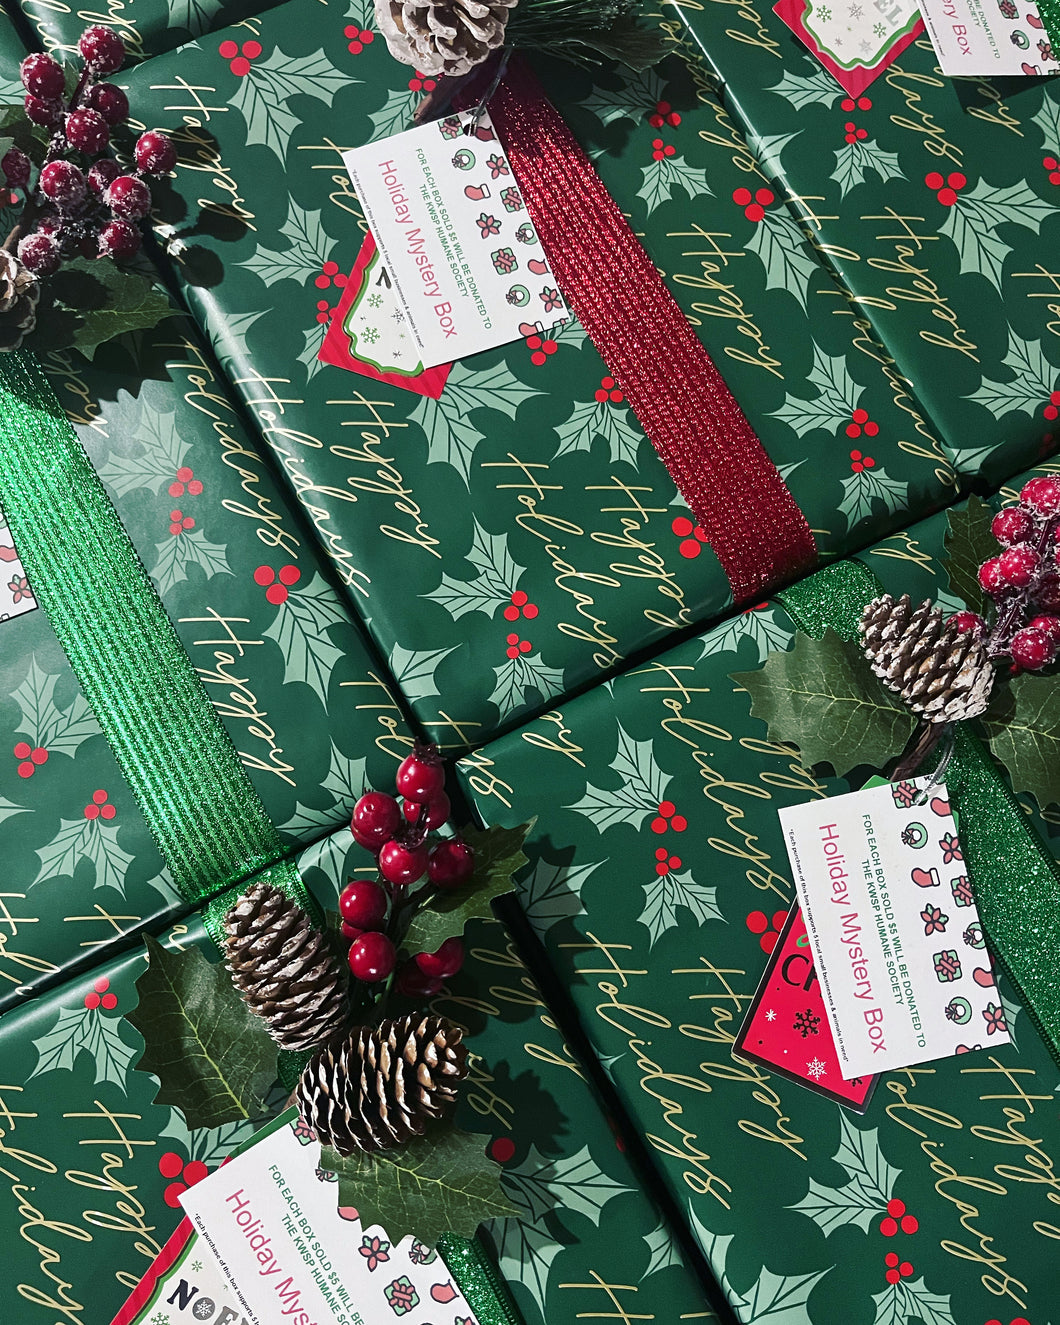 Holiday Mystery Gift Box | $5 to the KWSP Humane